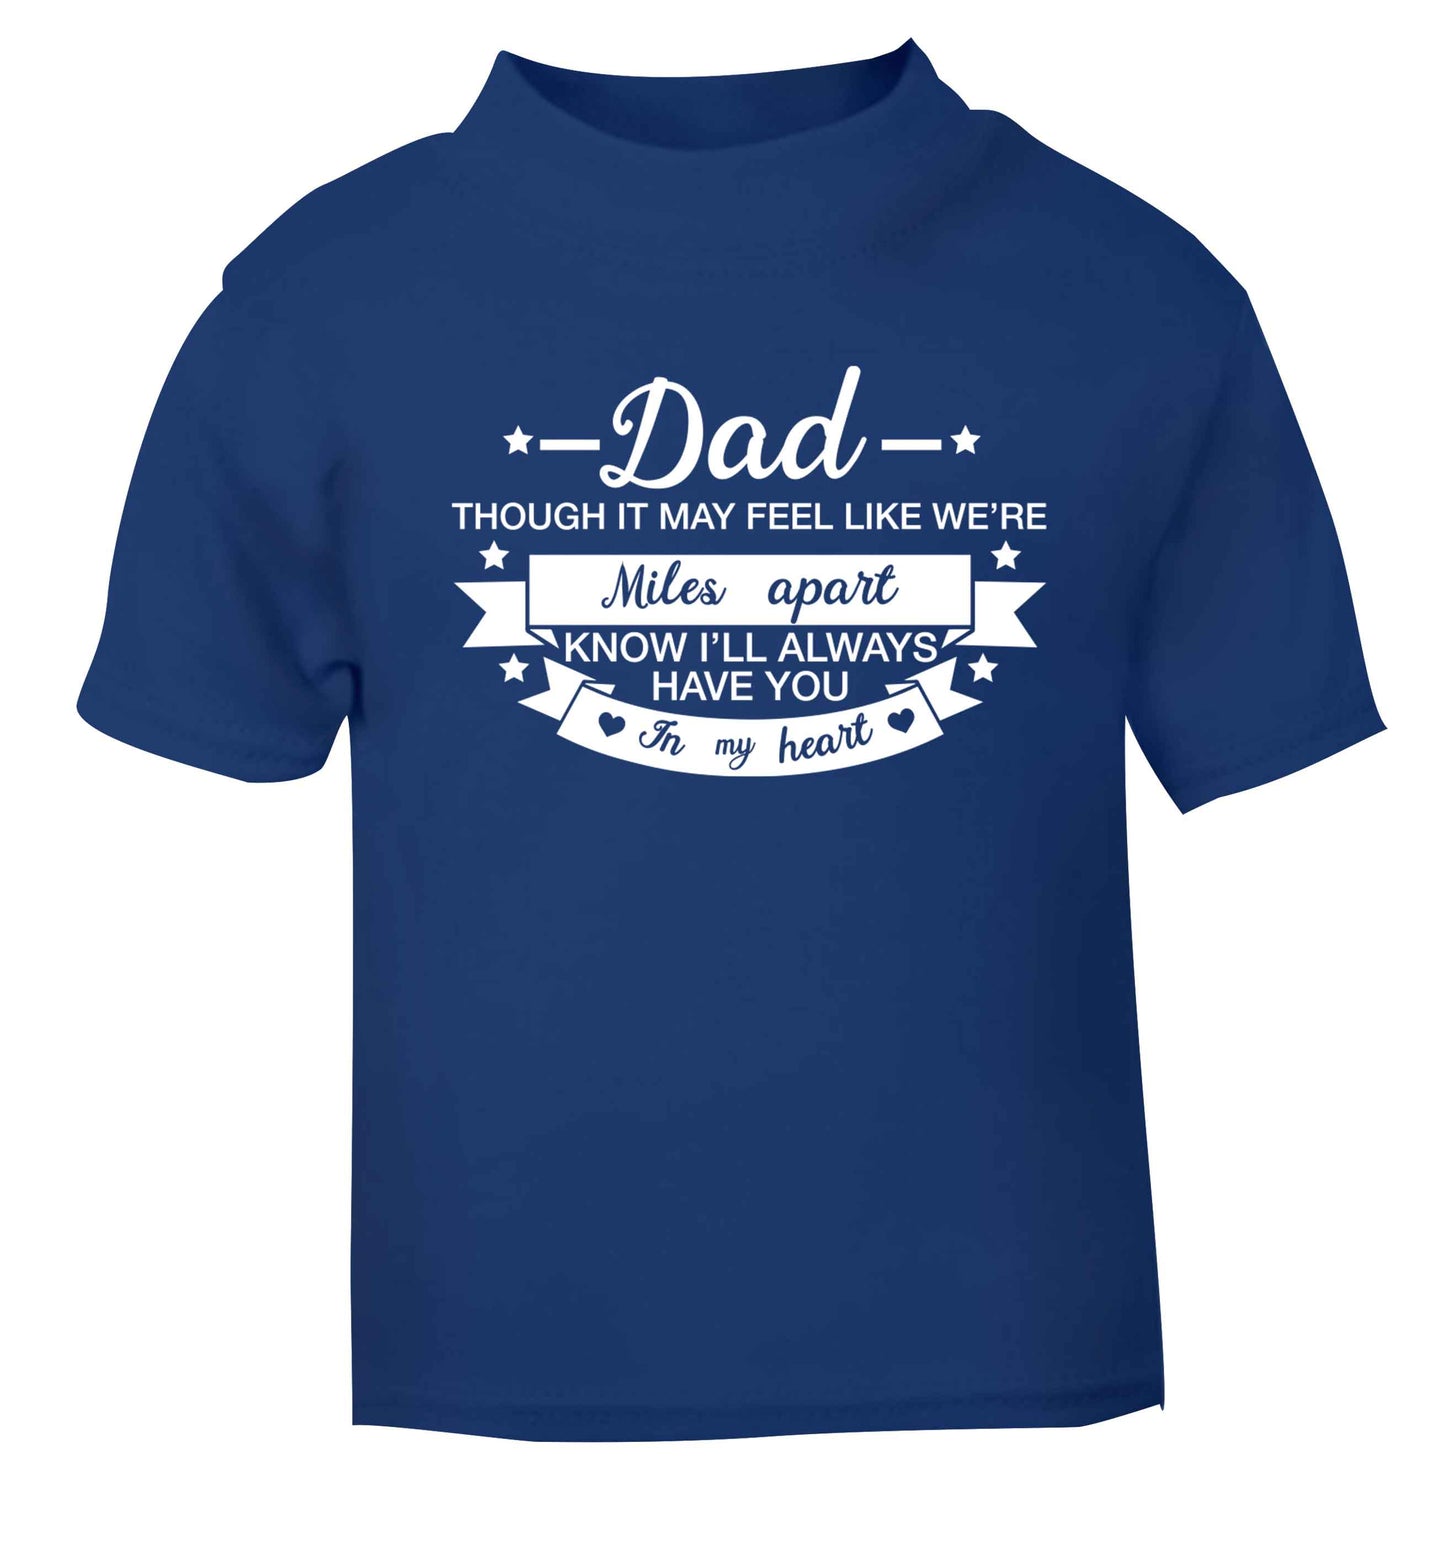 Dad though it may feel like we're miles apart know I'll always have you in my heart blue baby toddler Tshirt 2 Years